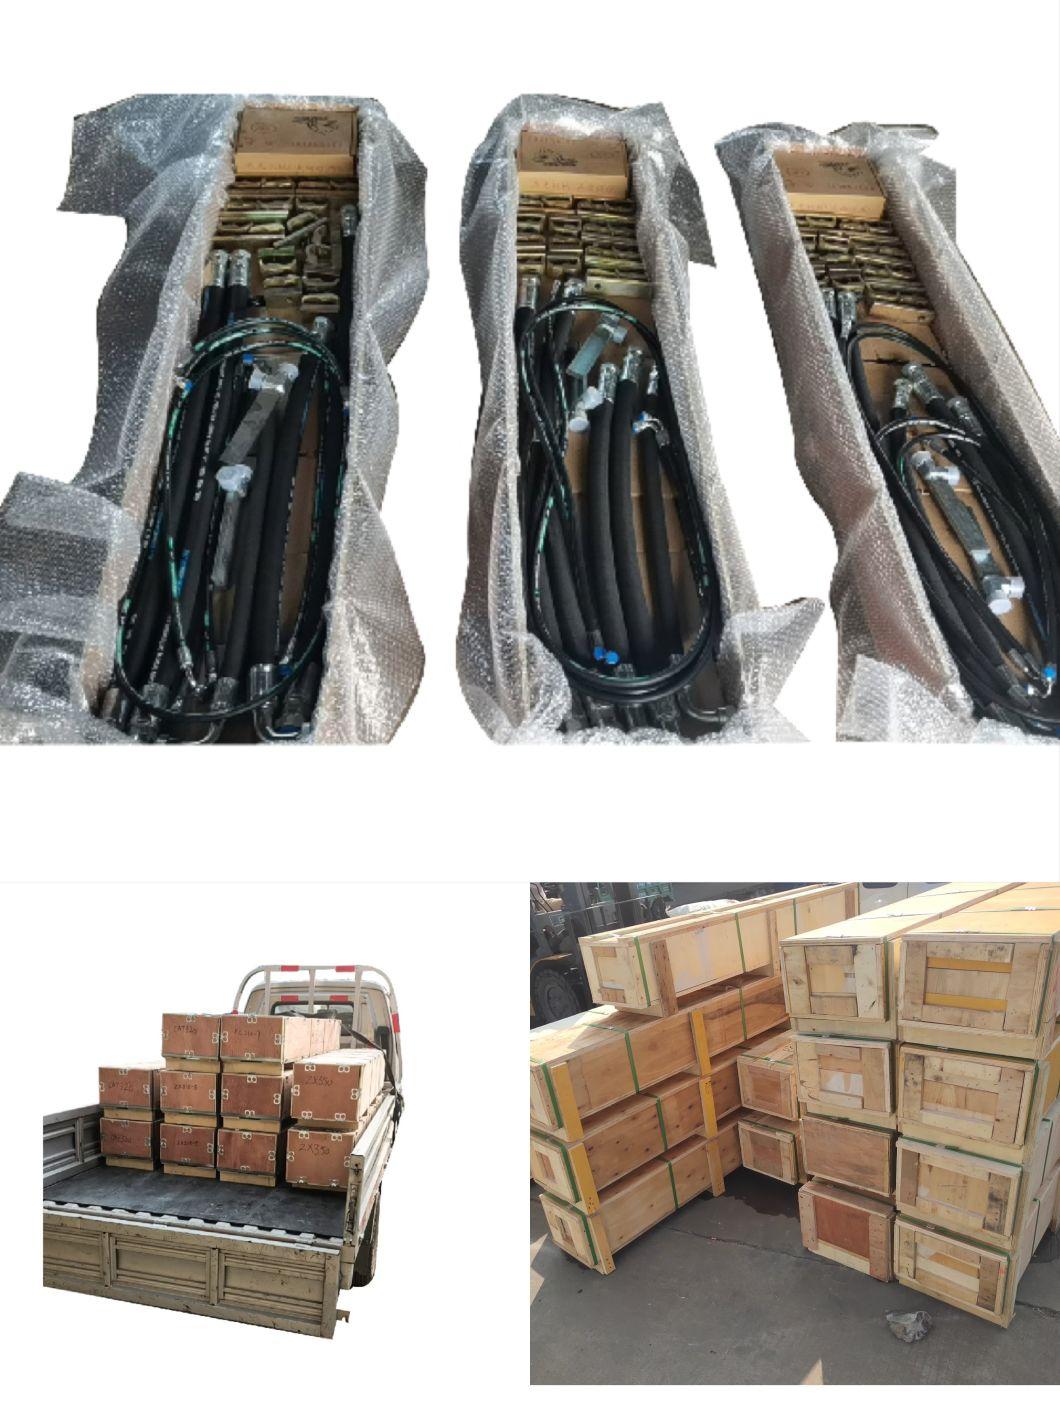 Hydraulic Hammer Pipelines for Excavator